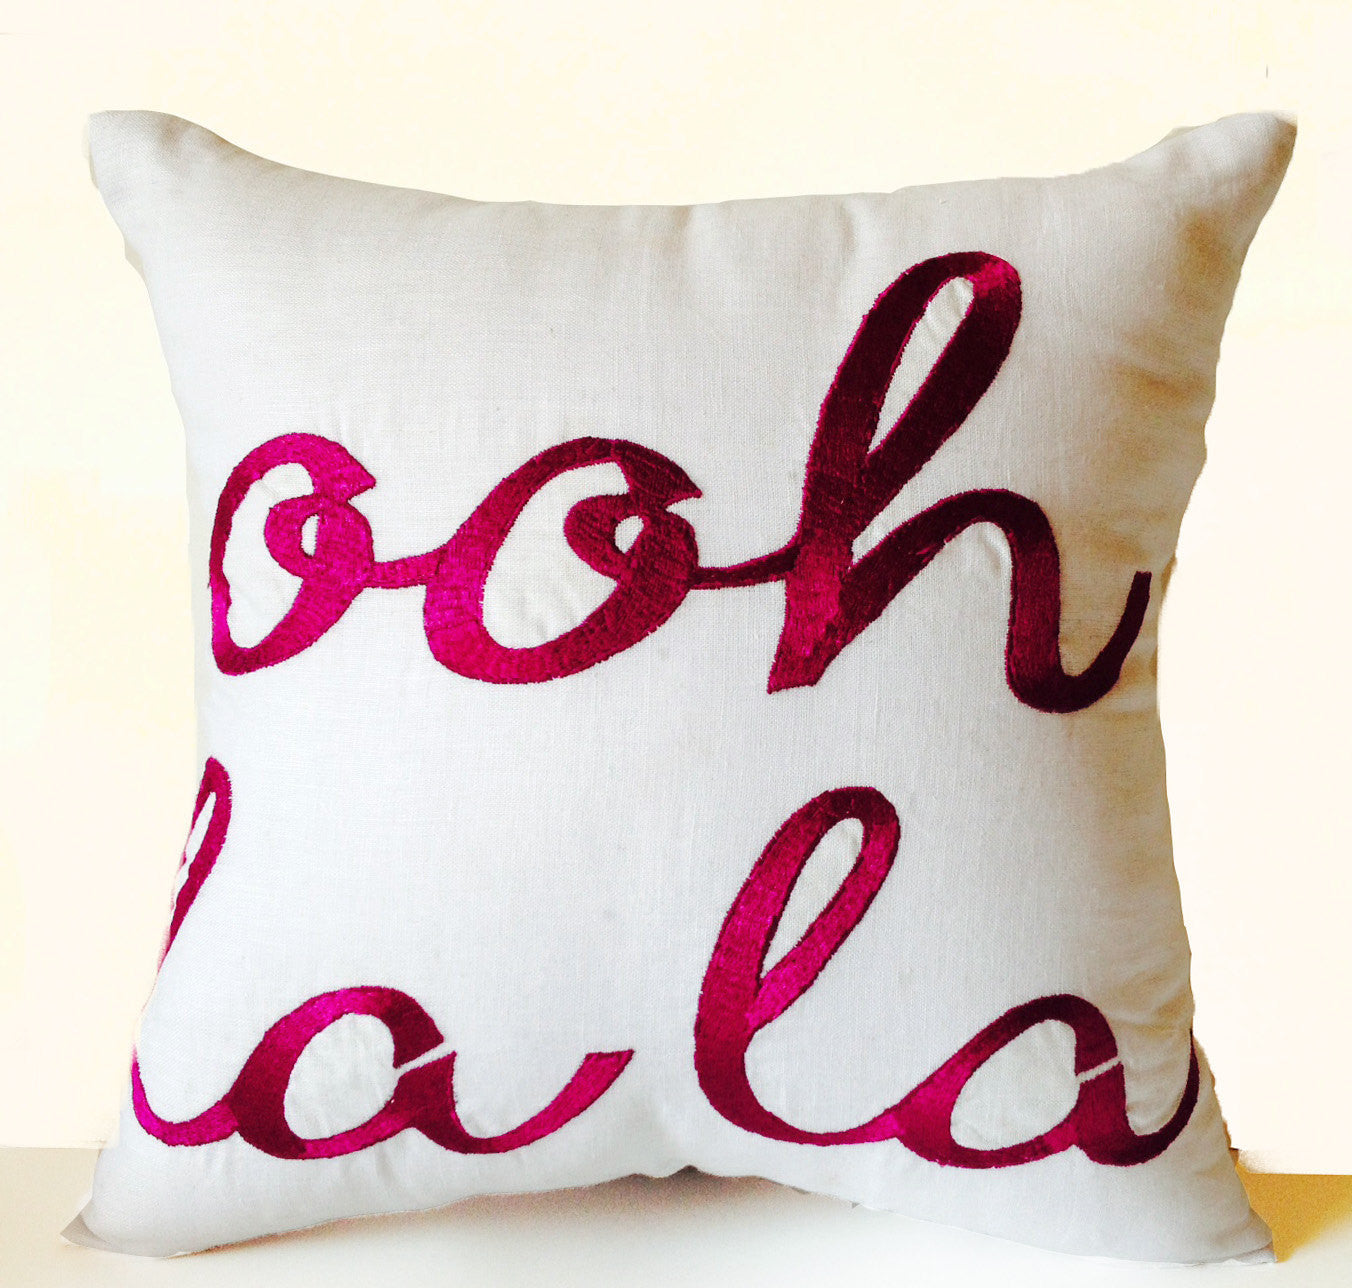 Buy handcrafted throw pillow from Amore Beaute